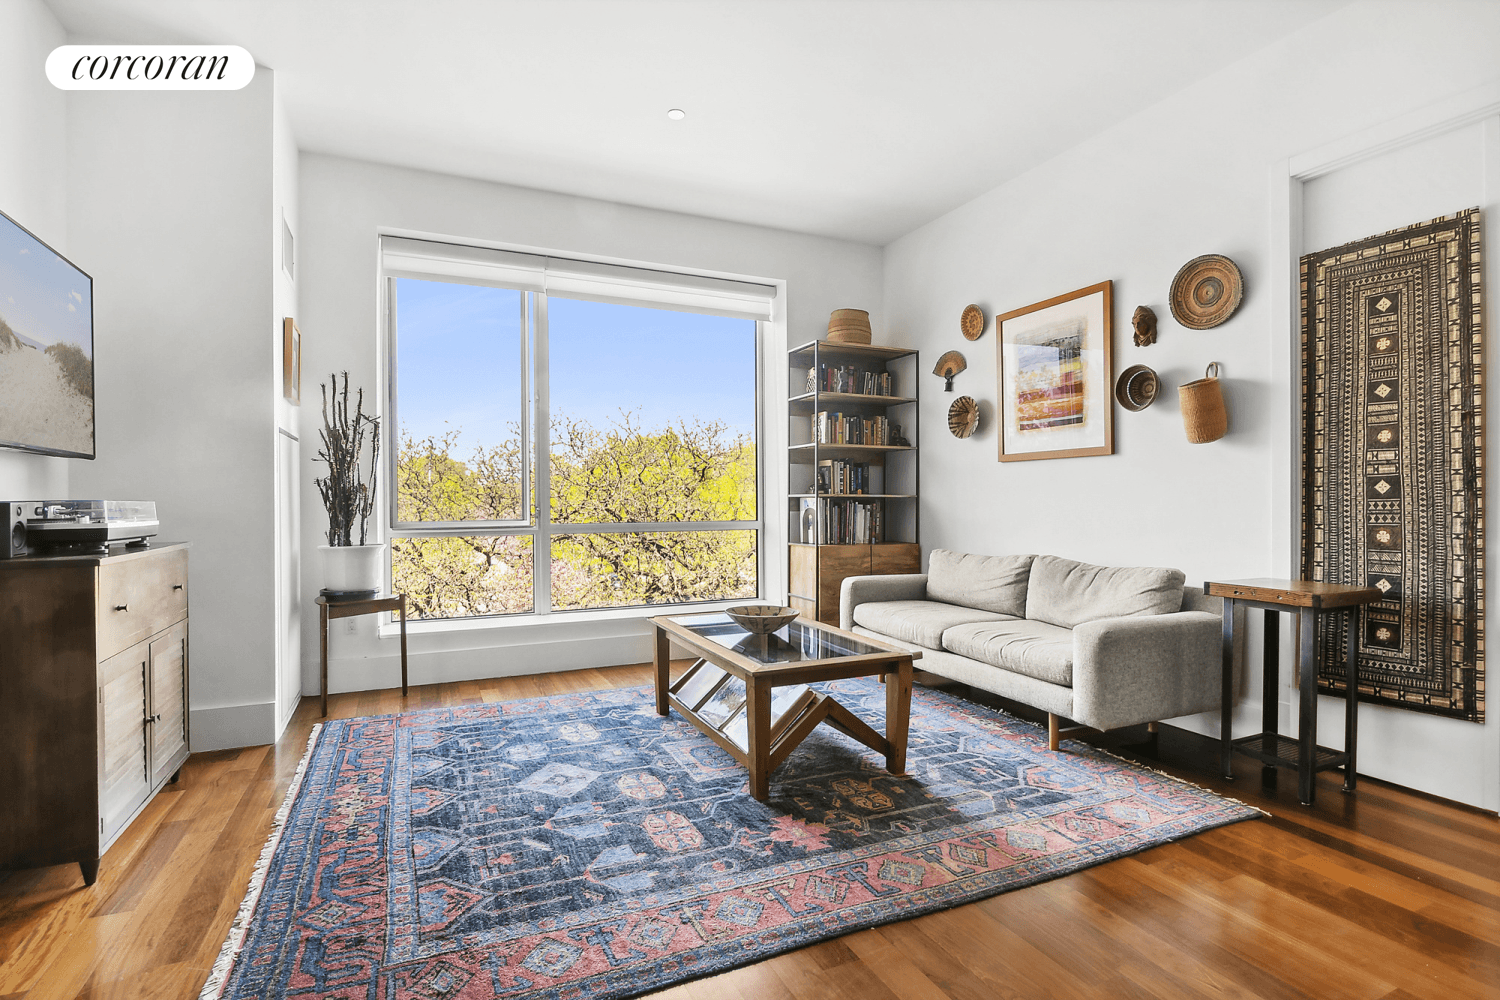 Bask in the breathtaking Manhattan skyline and lush McCarren Park vistas from this sun drenched gem in Williamsburg.